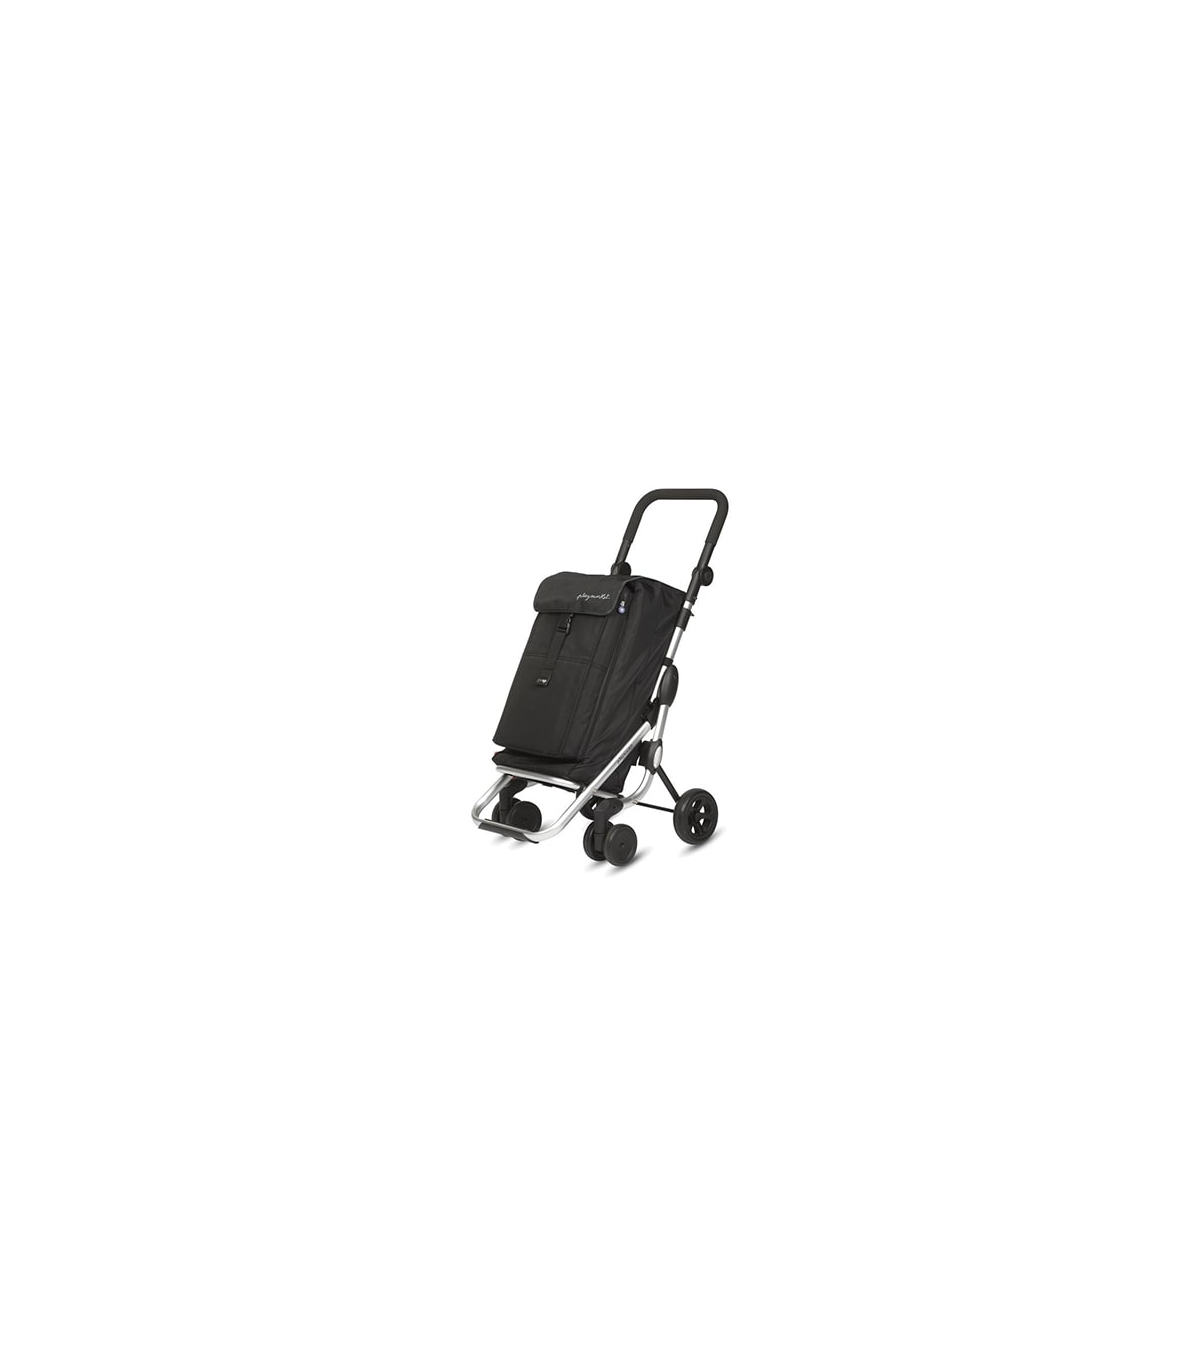 Chariot de courses pliant - Caddie Go Up - Medical-Thiry